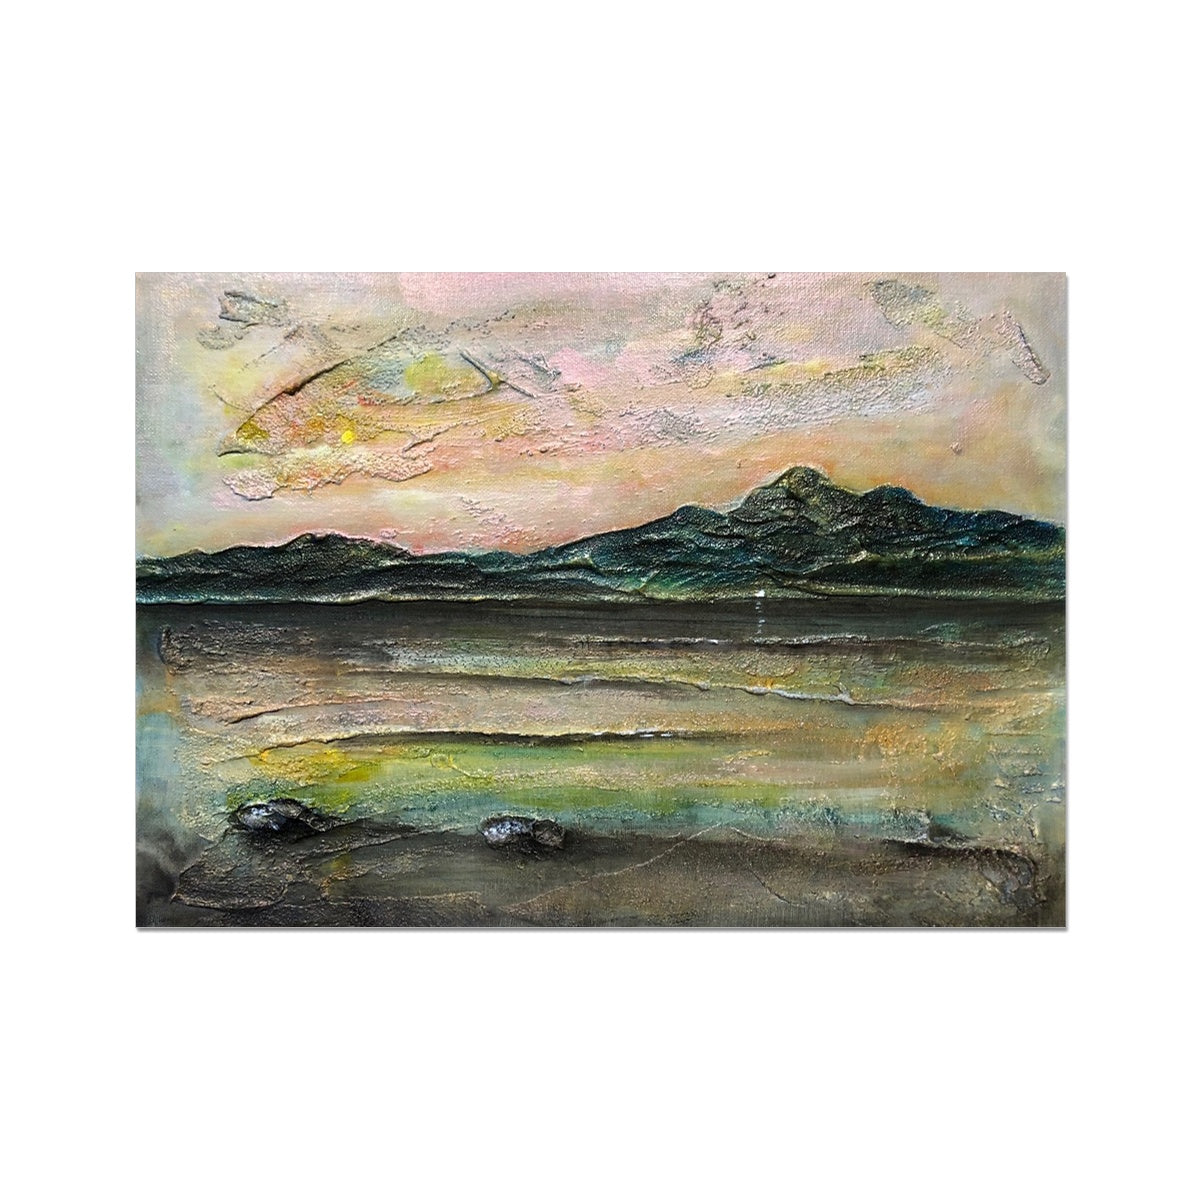 An Ethereal Loch Na Dal Skye Painting | Fine Art Prints From Scotland-Unframed Prints-Scottish Lochs & Mountains Art Gallery-A2 Landscape-Paintings, Prints, Homeware, Art Gifts From Scotland By Scottish Artist Kevin Hunter